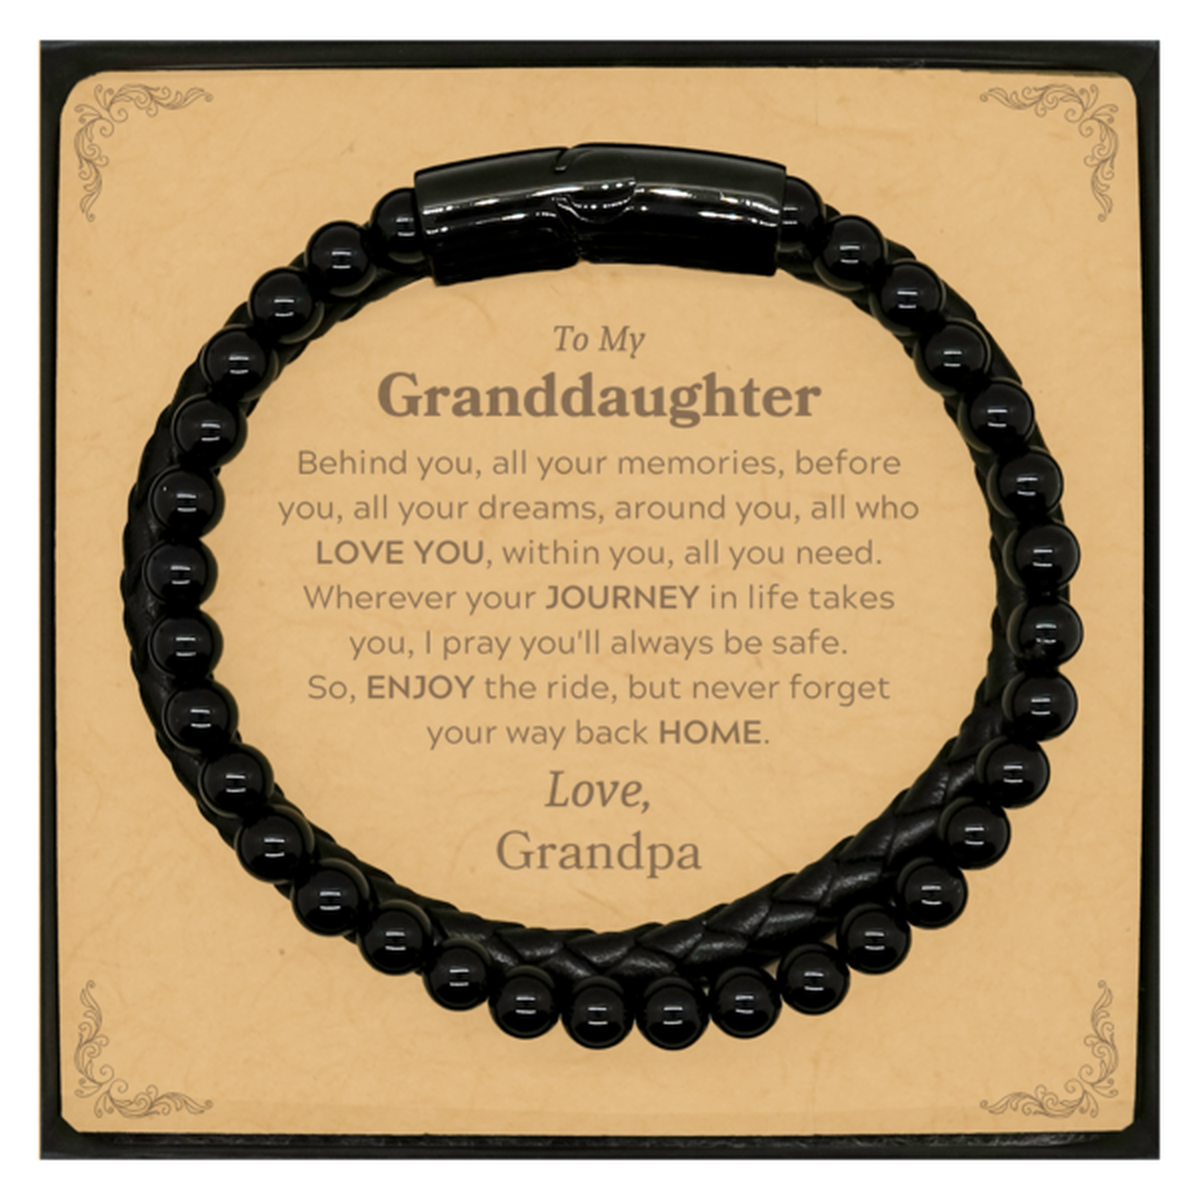 To My Granddaughter Graduation Gifts from Grandpa, Granddaughter Stone Leather Bracelets Christmas Birthday Gifts for Granddaughter Behind you, all your memories, before you, all your dreams. Love, Grandpa